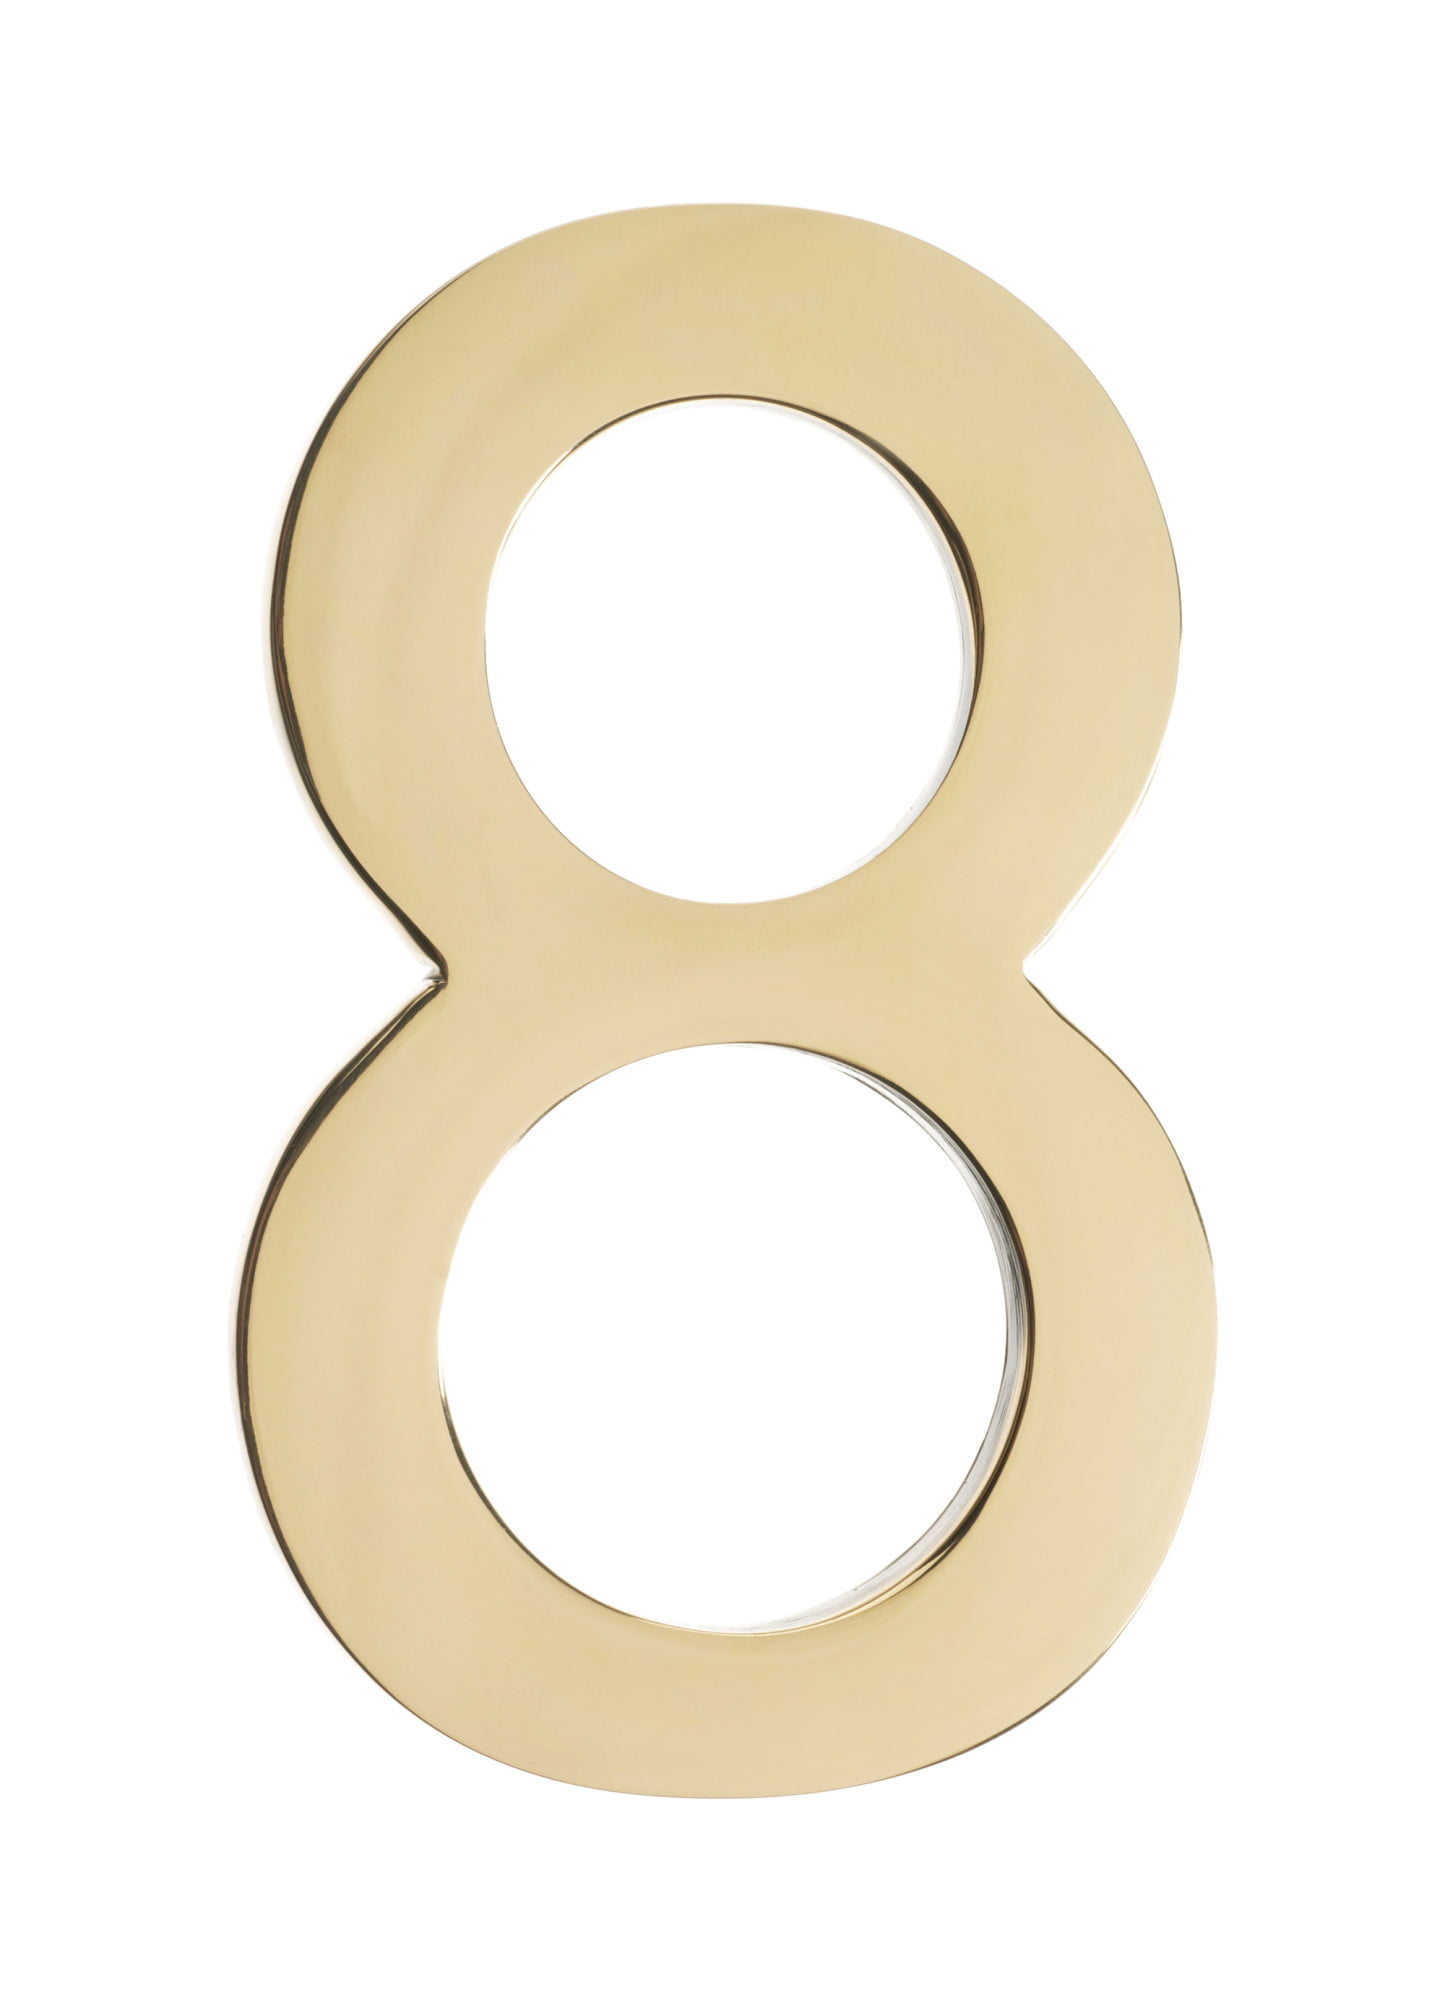 Floating House Number 8, Polished Brass - 4 In.